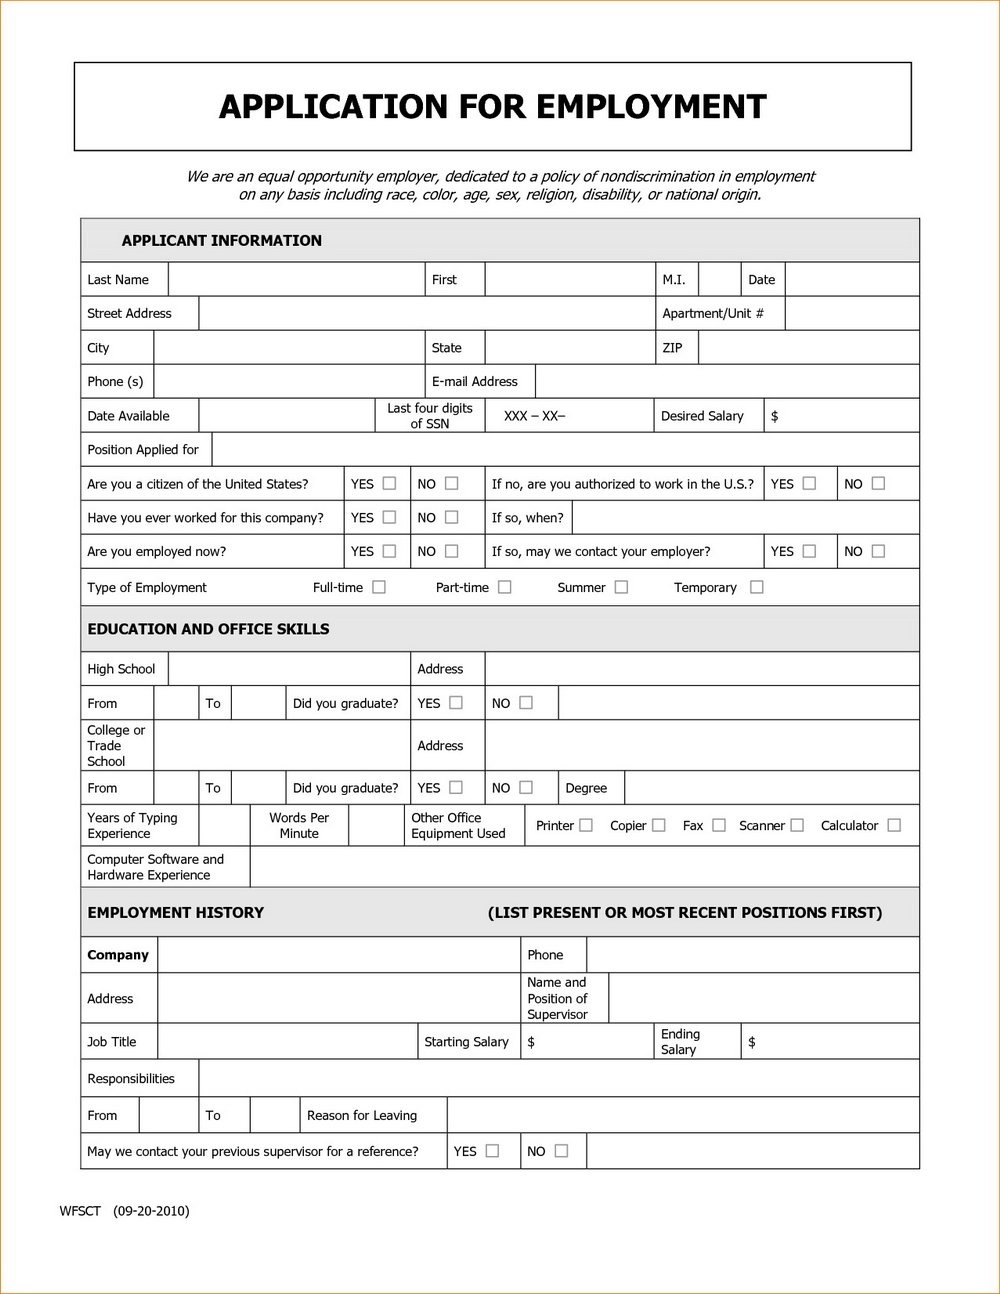 Application form for job free download